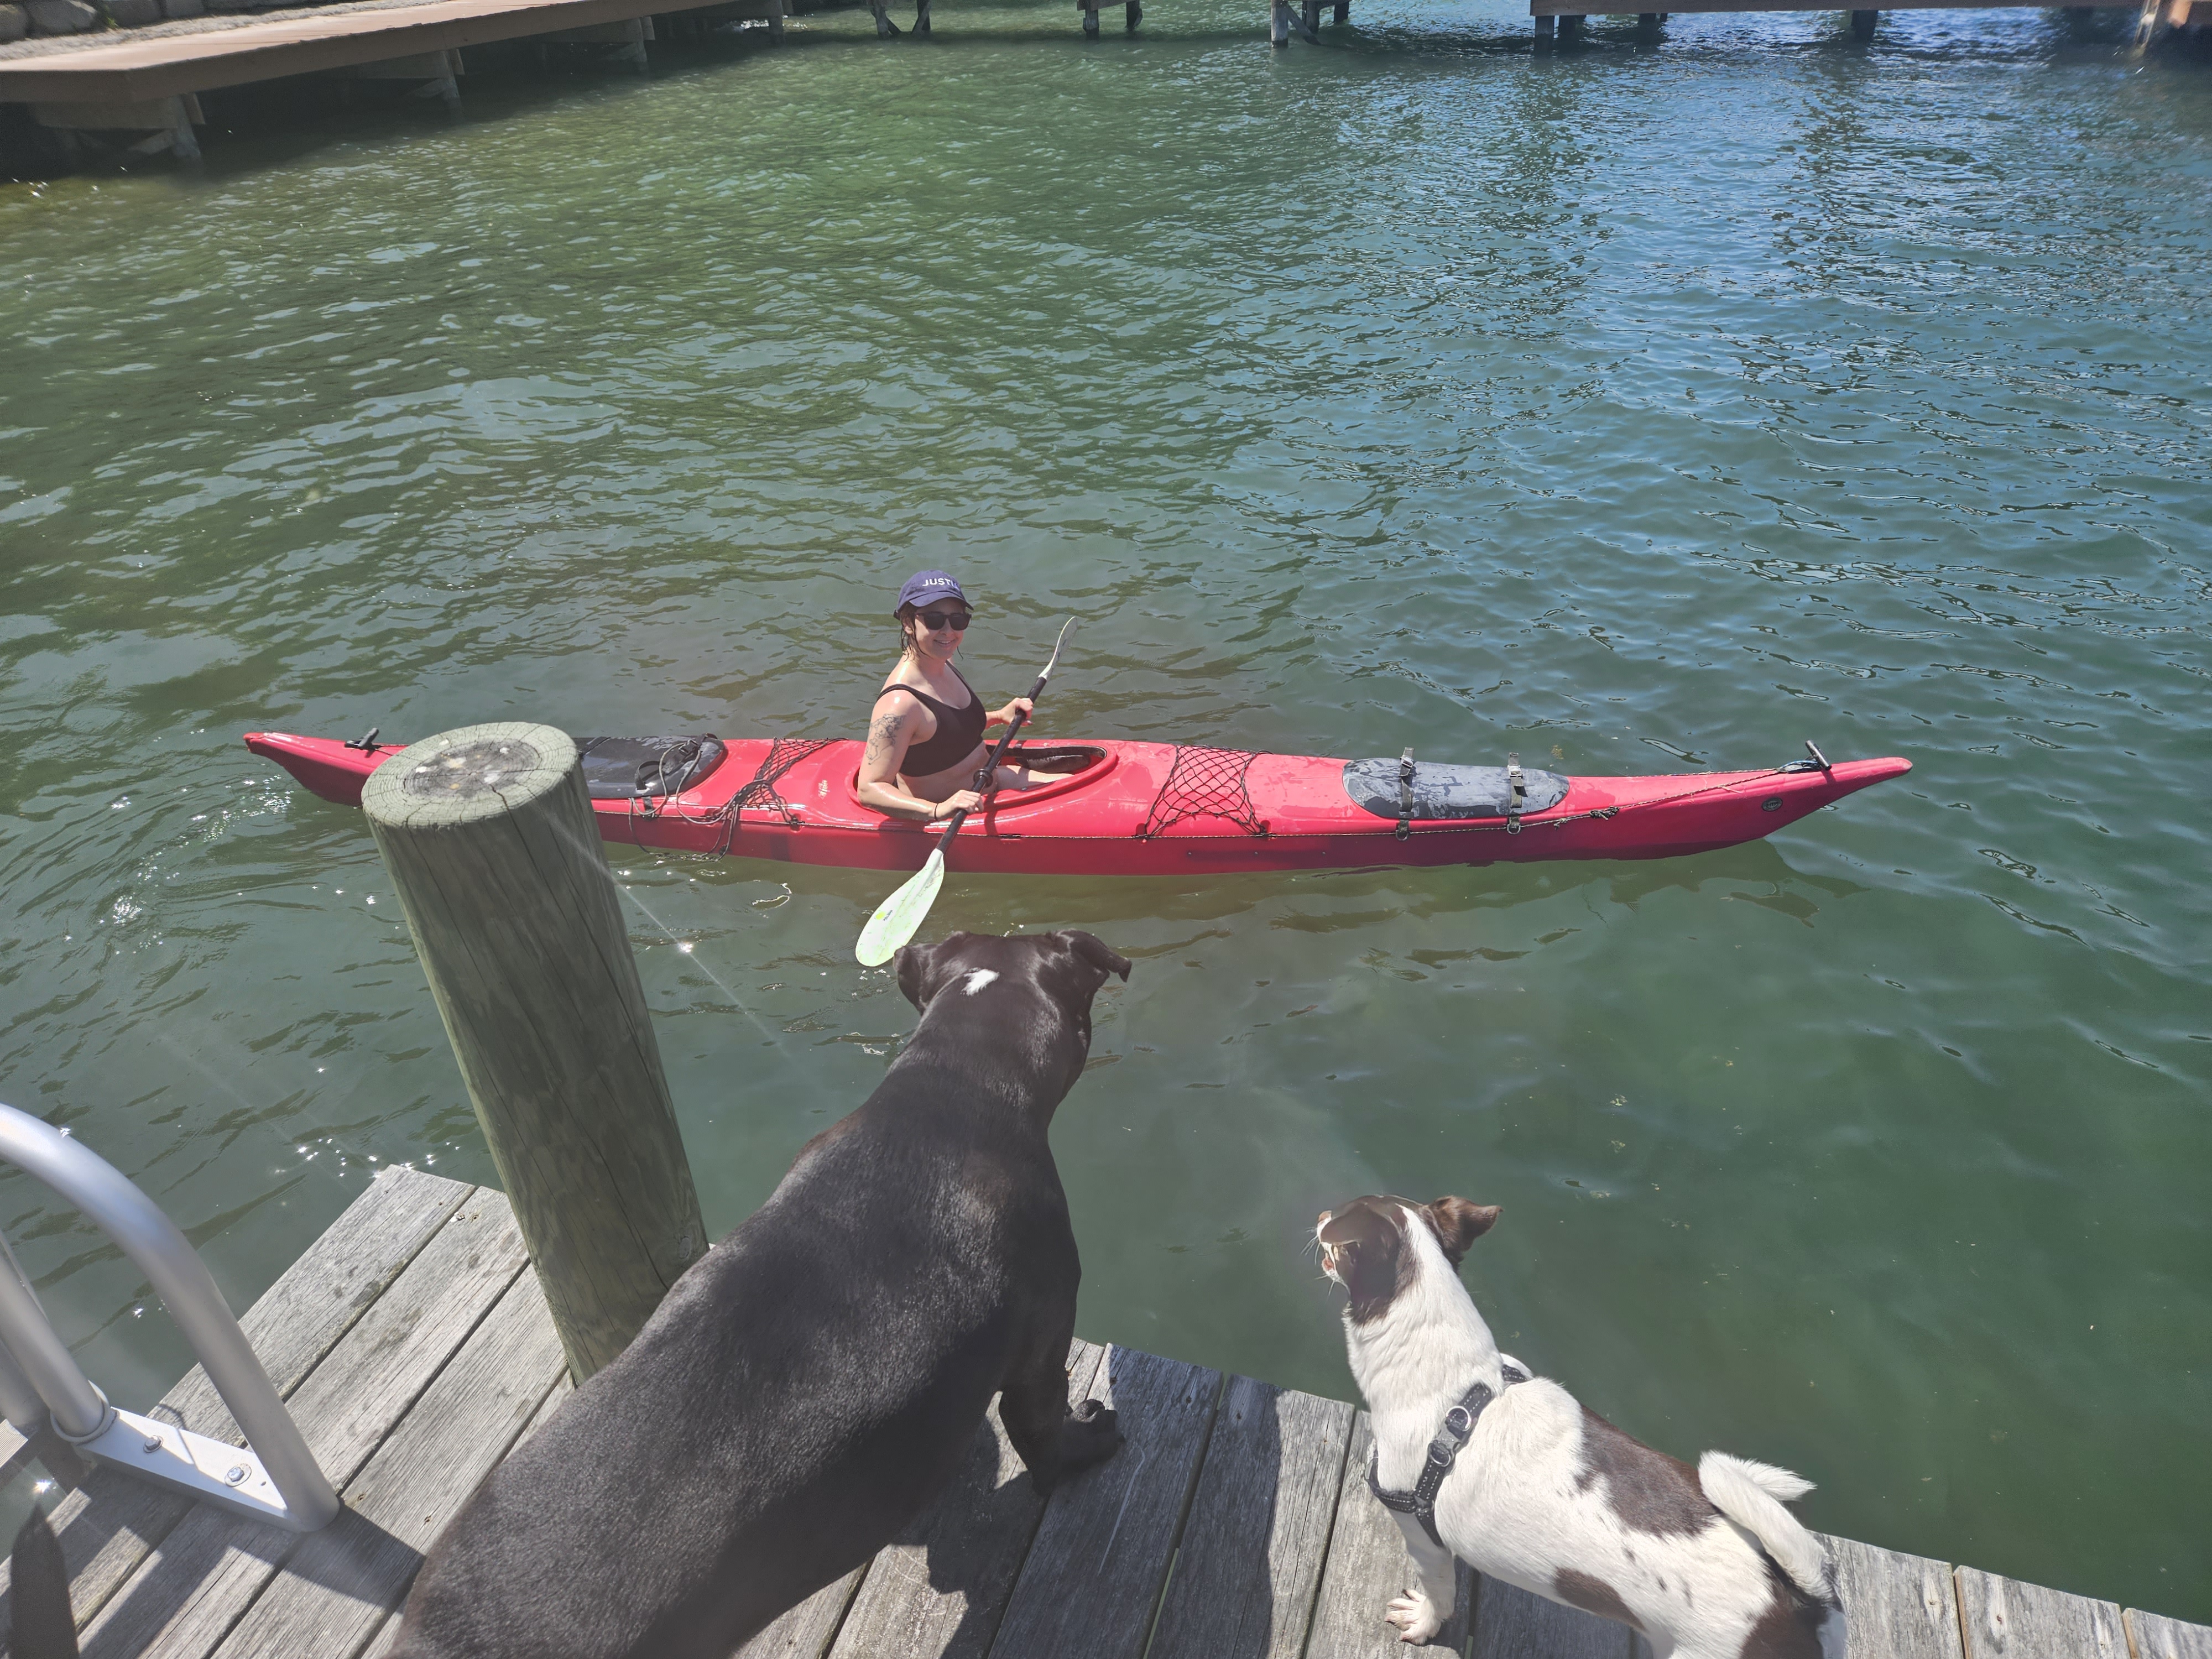 View from dock of a woman kayaking and smiling with her dogs looking on from shore.